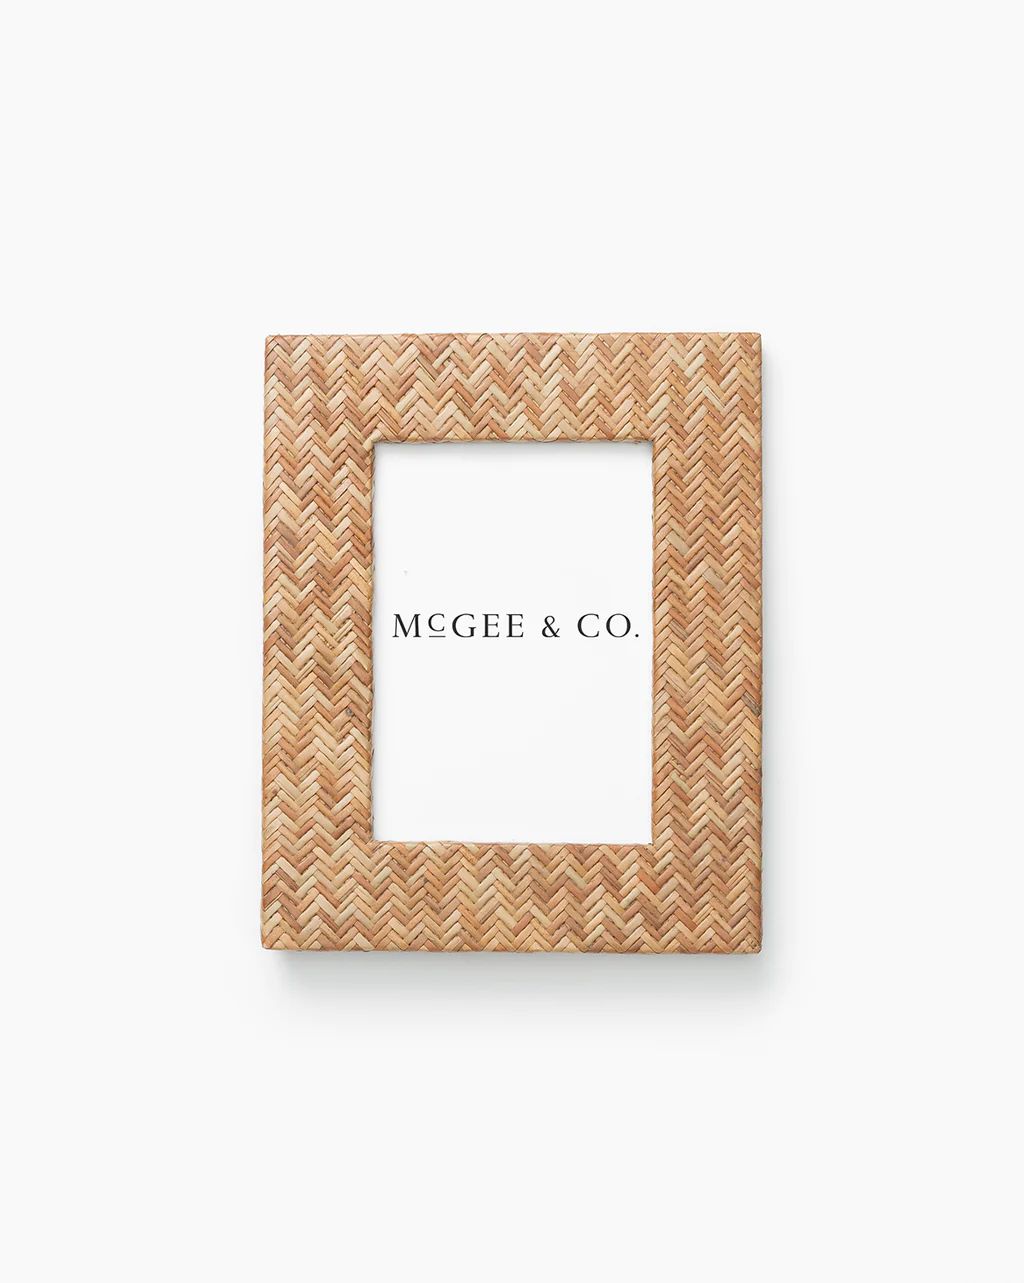 Double Weave Frame | McGee & Co.